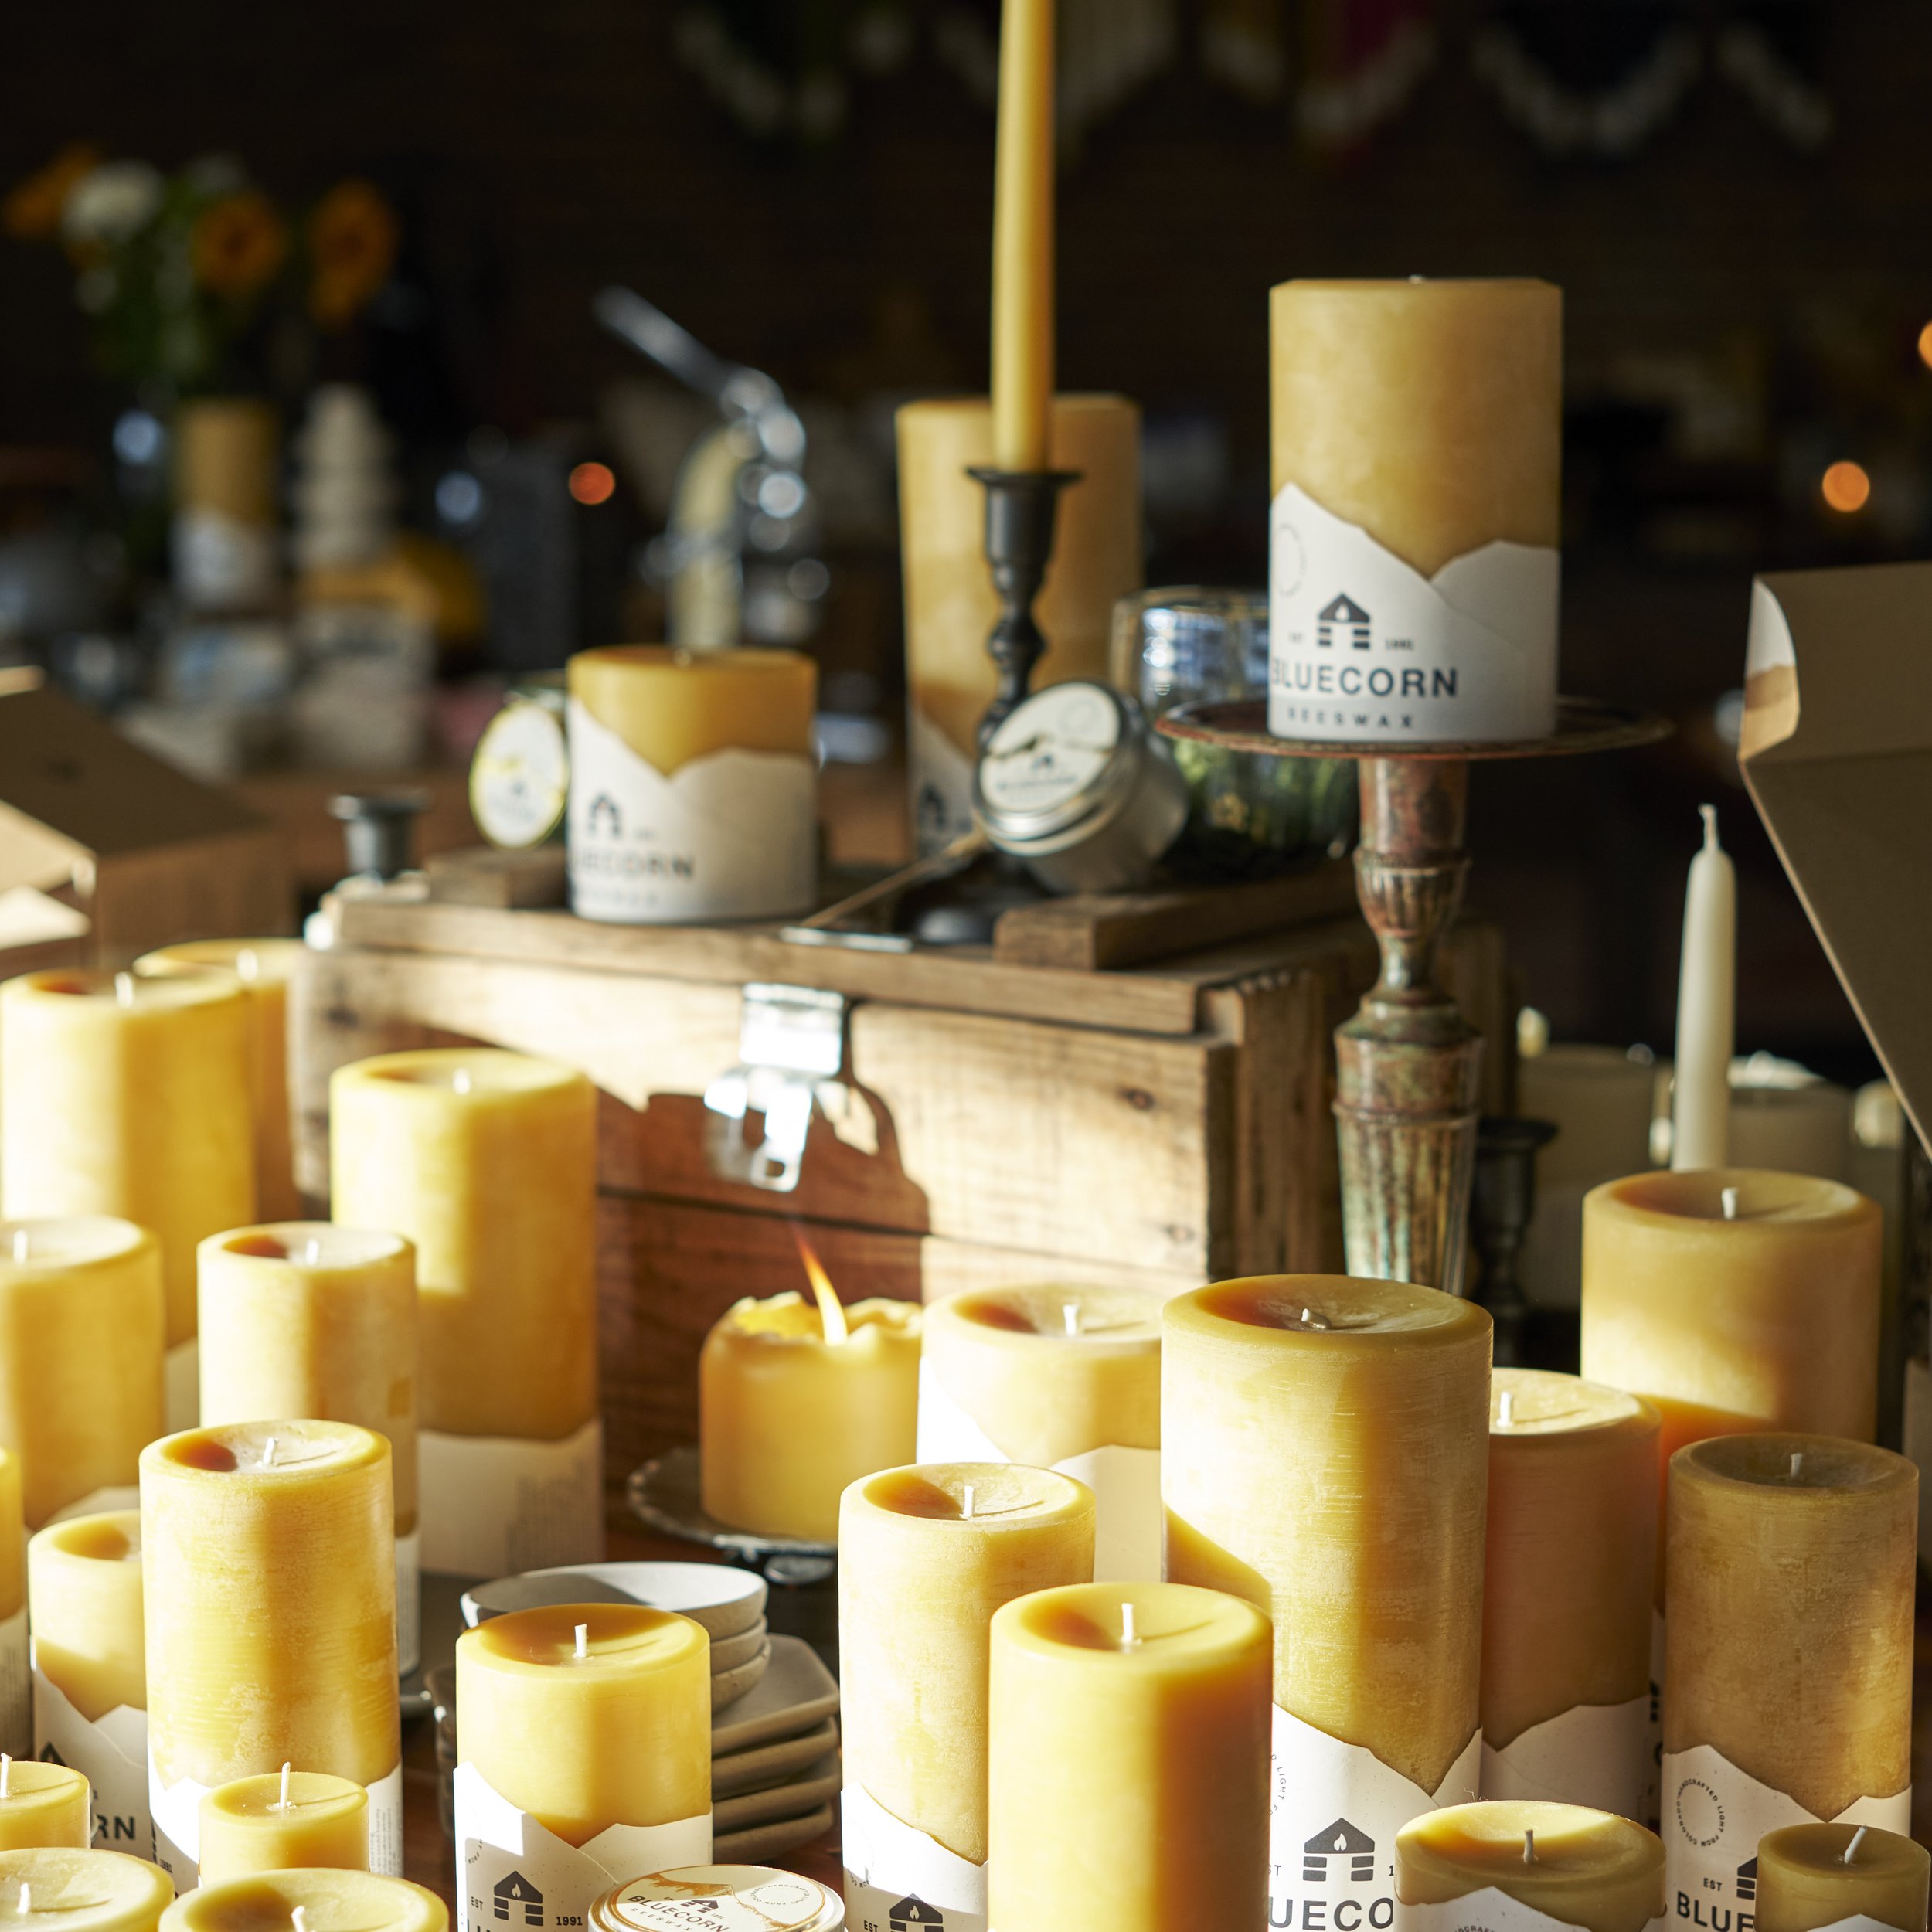 Bluecorn Opens The Curtain To Beeswax Candle Making At New Retail Café